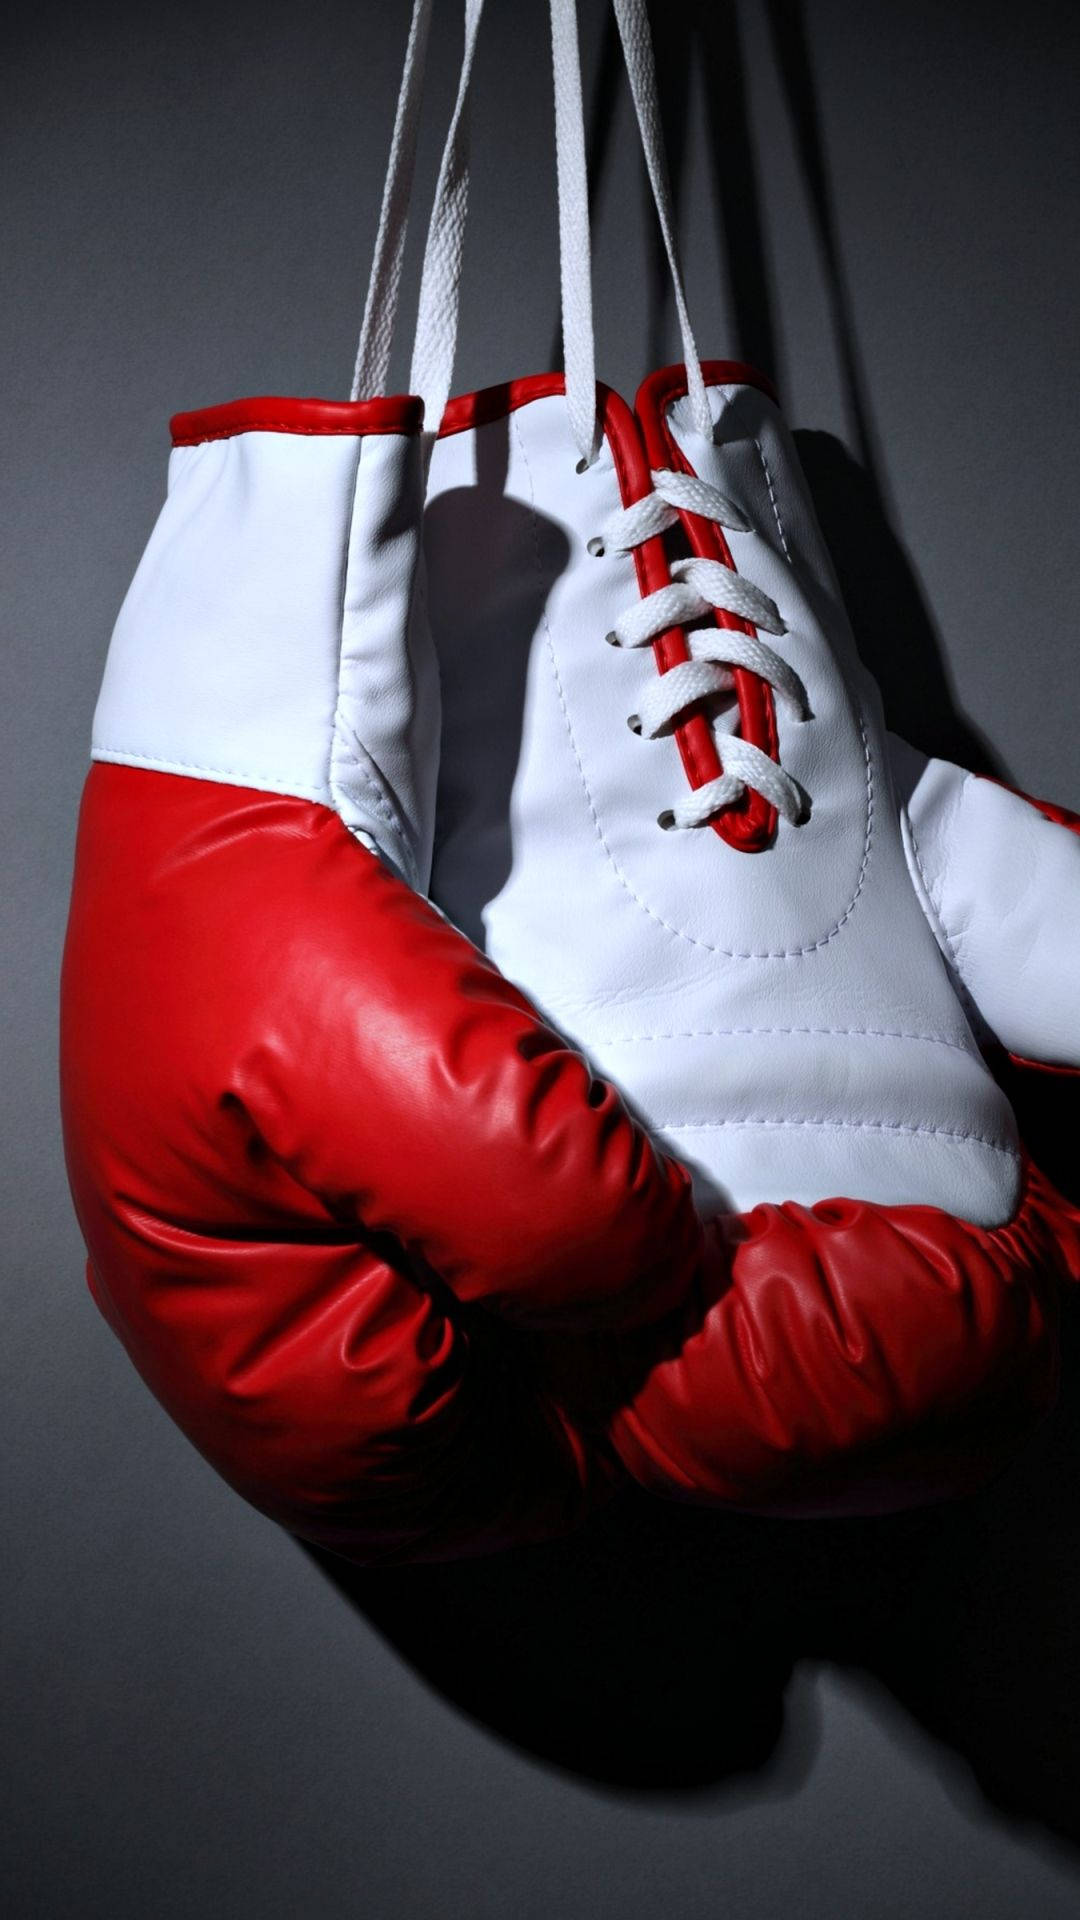 Download Hanging White Red Boxing Gloves Wallpaper 